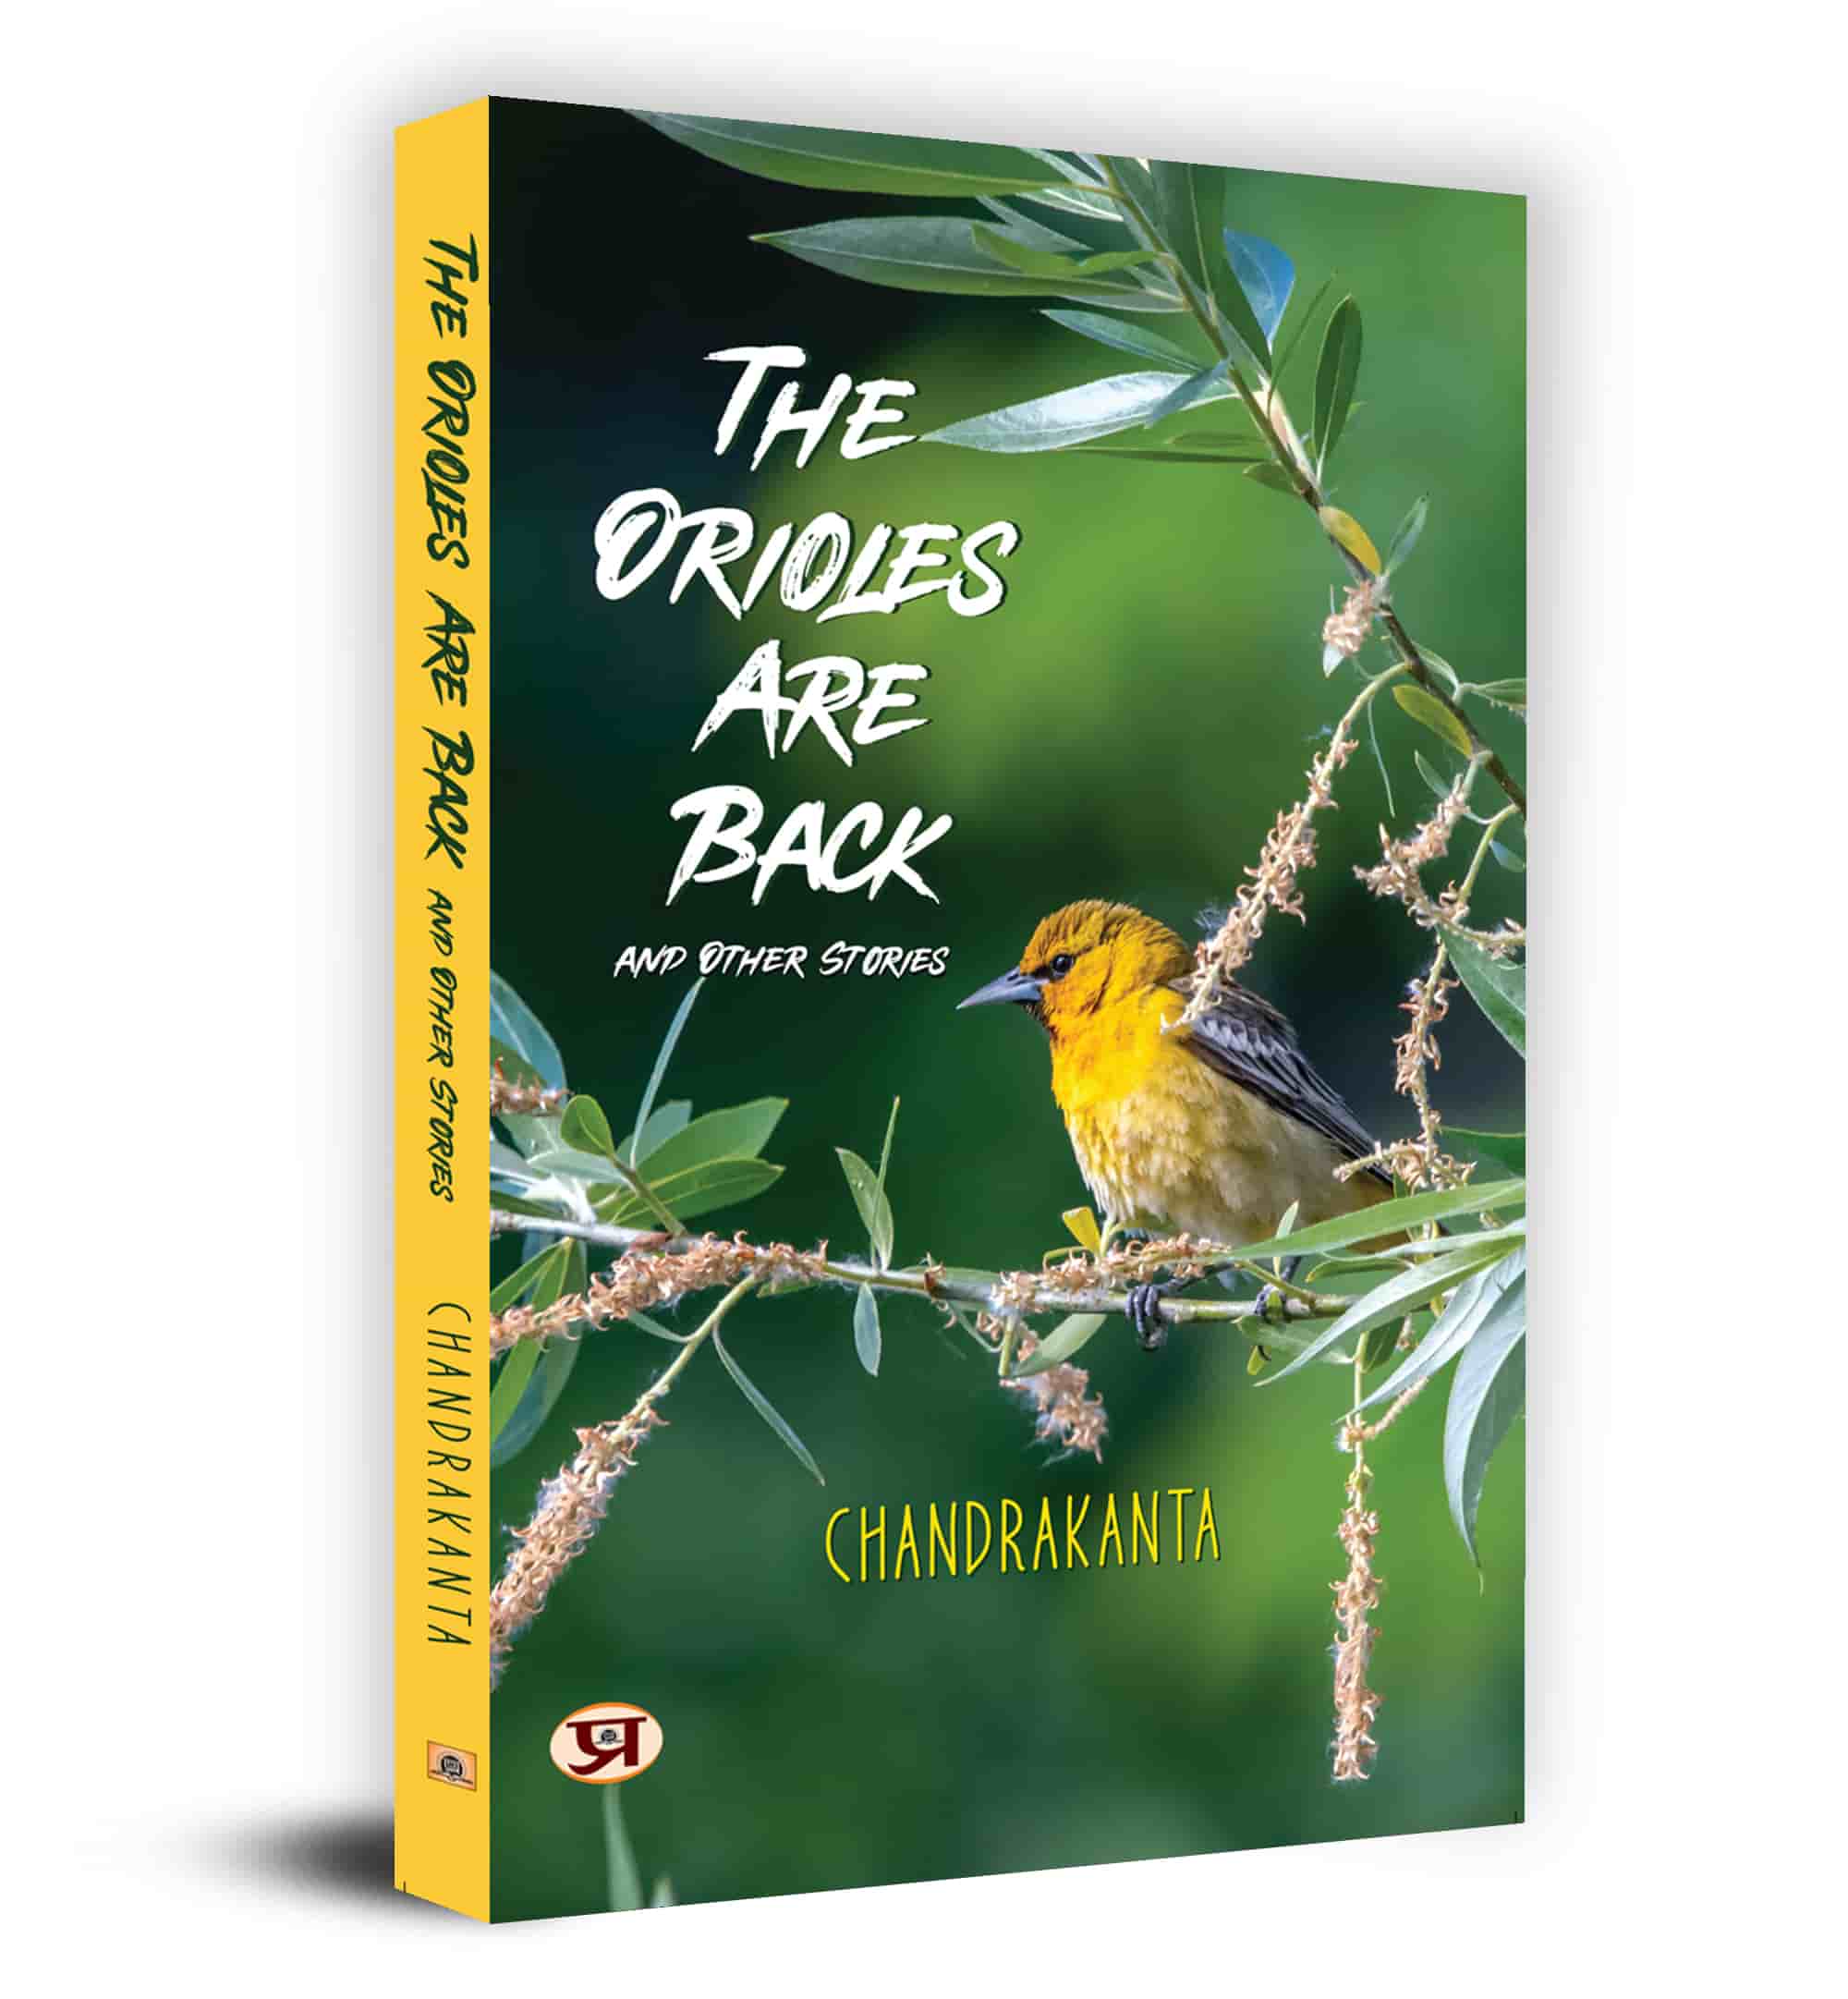 The Orioles are Back and Other Stories Book in English- Chandrakanta